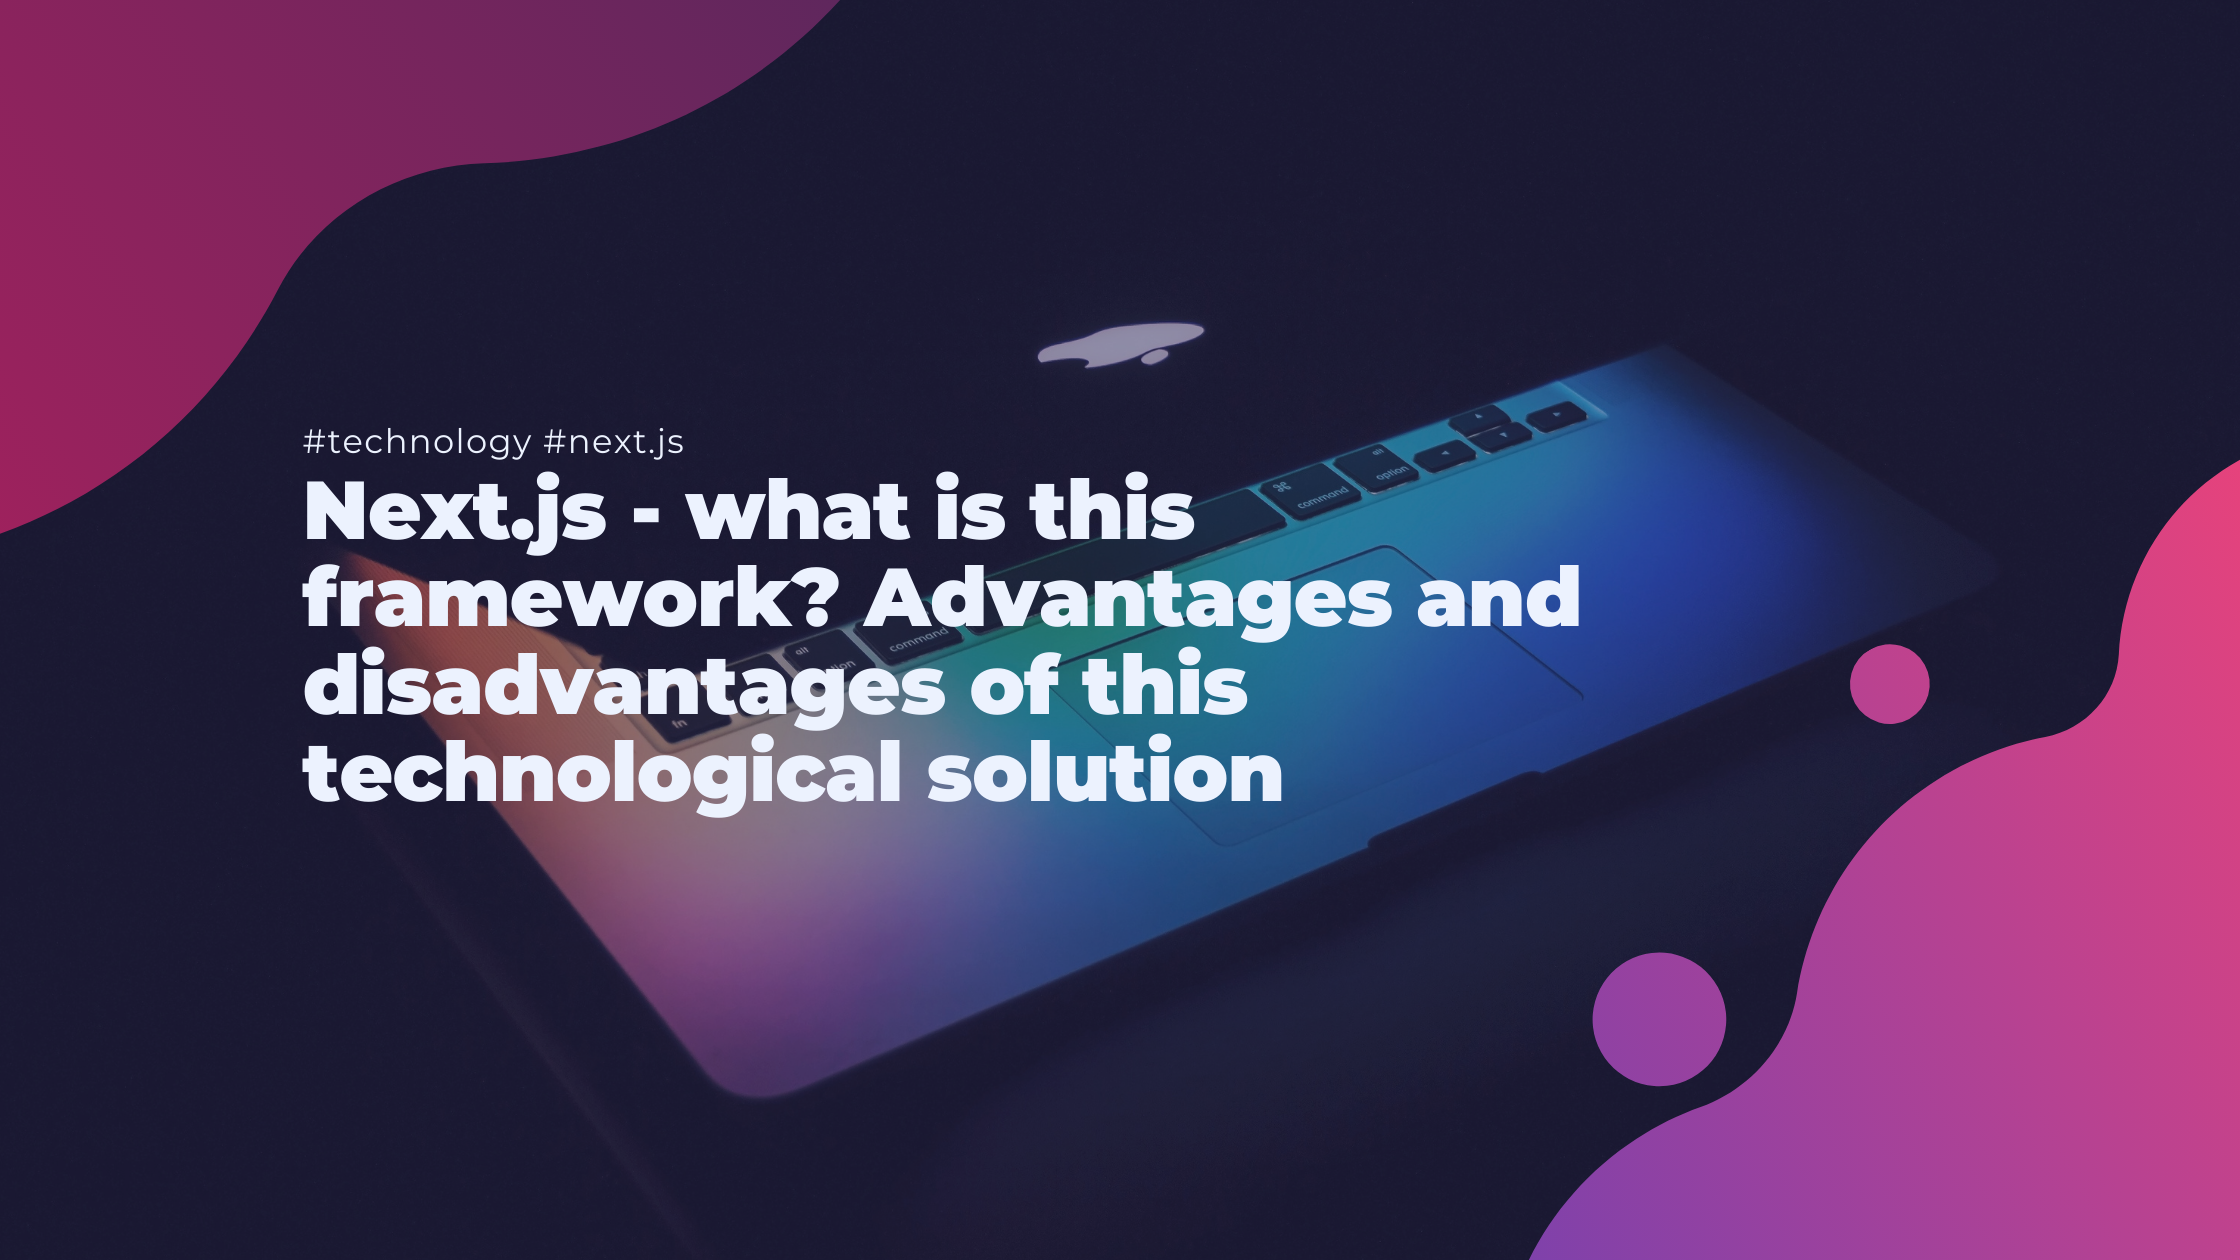 Next.js - what is this framework? Advantages and disadvantages of this technological solution